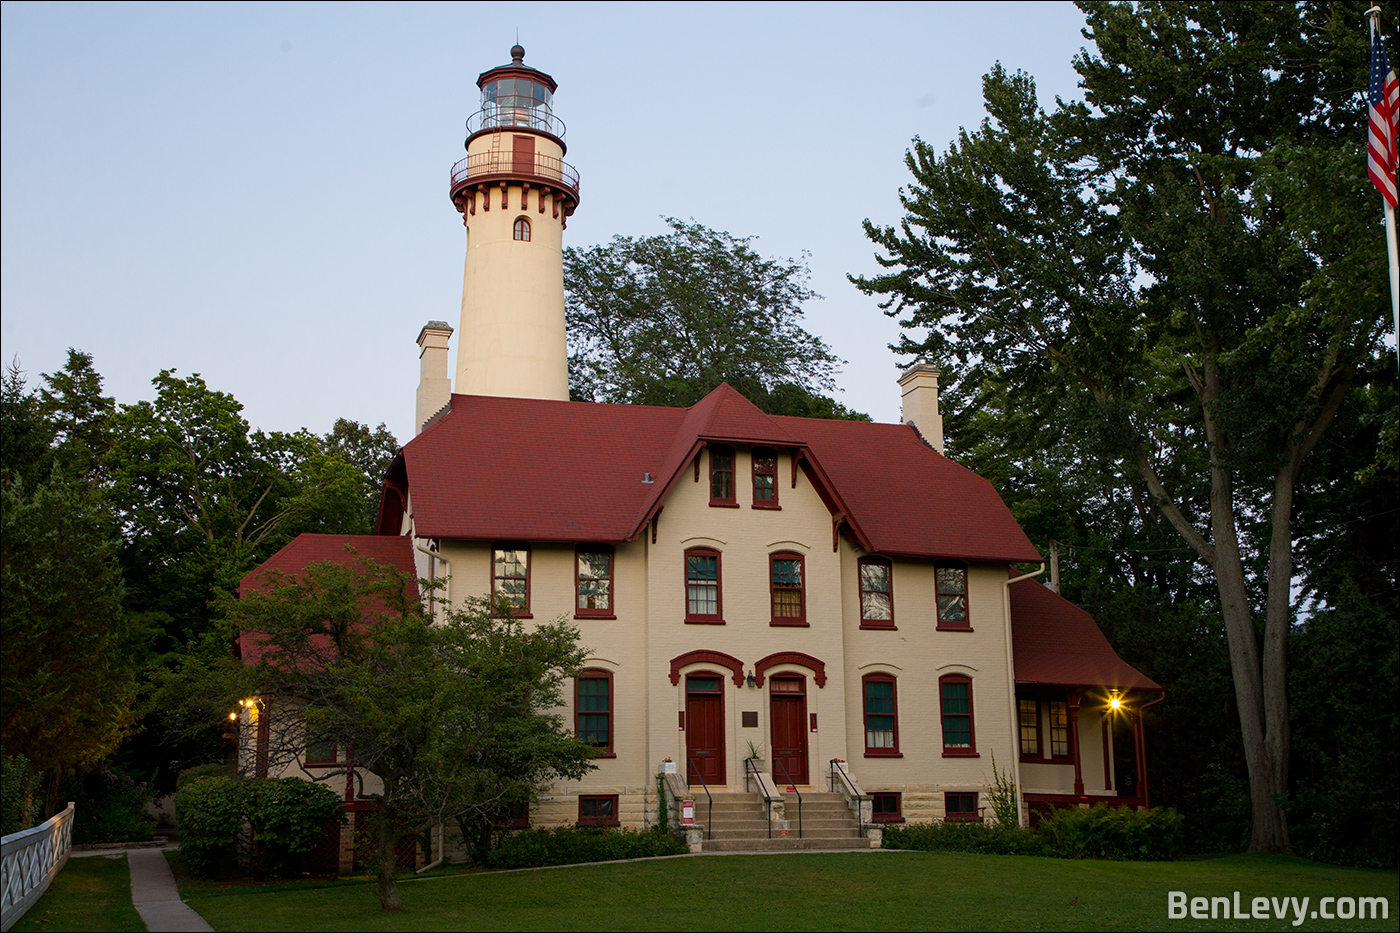 The Grosse Point Lighthouse in Evanston